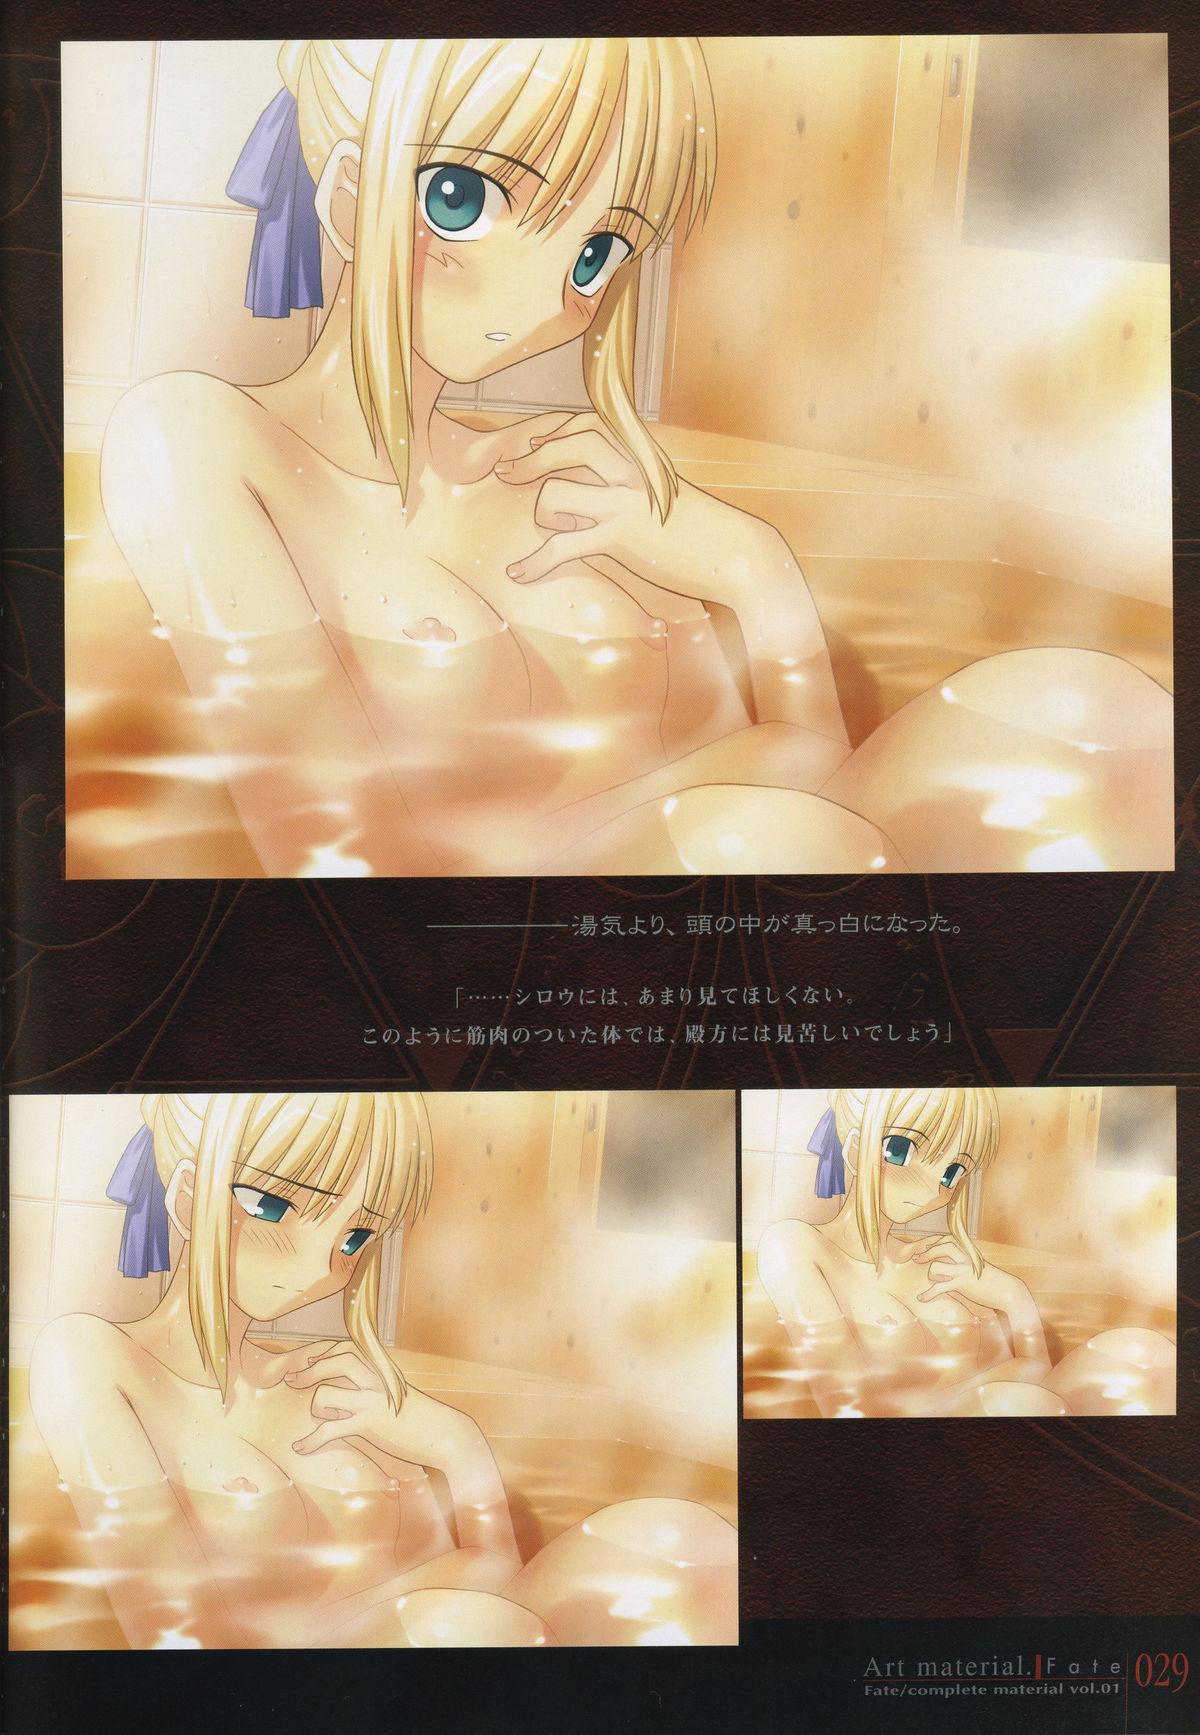 Fate/complete material I - Art material. 33